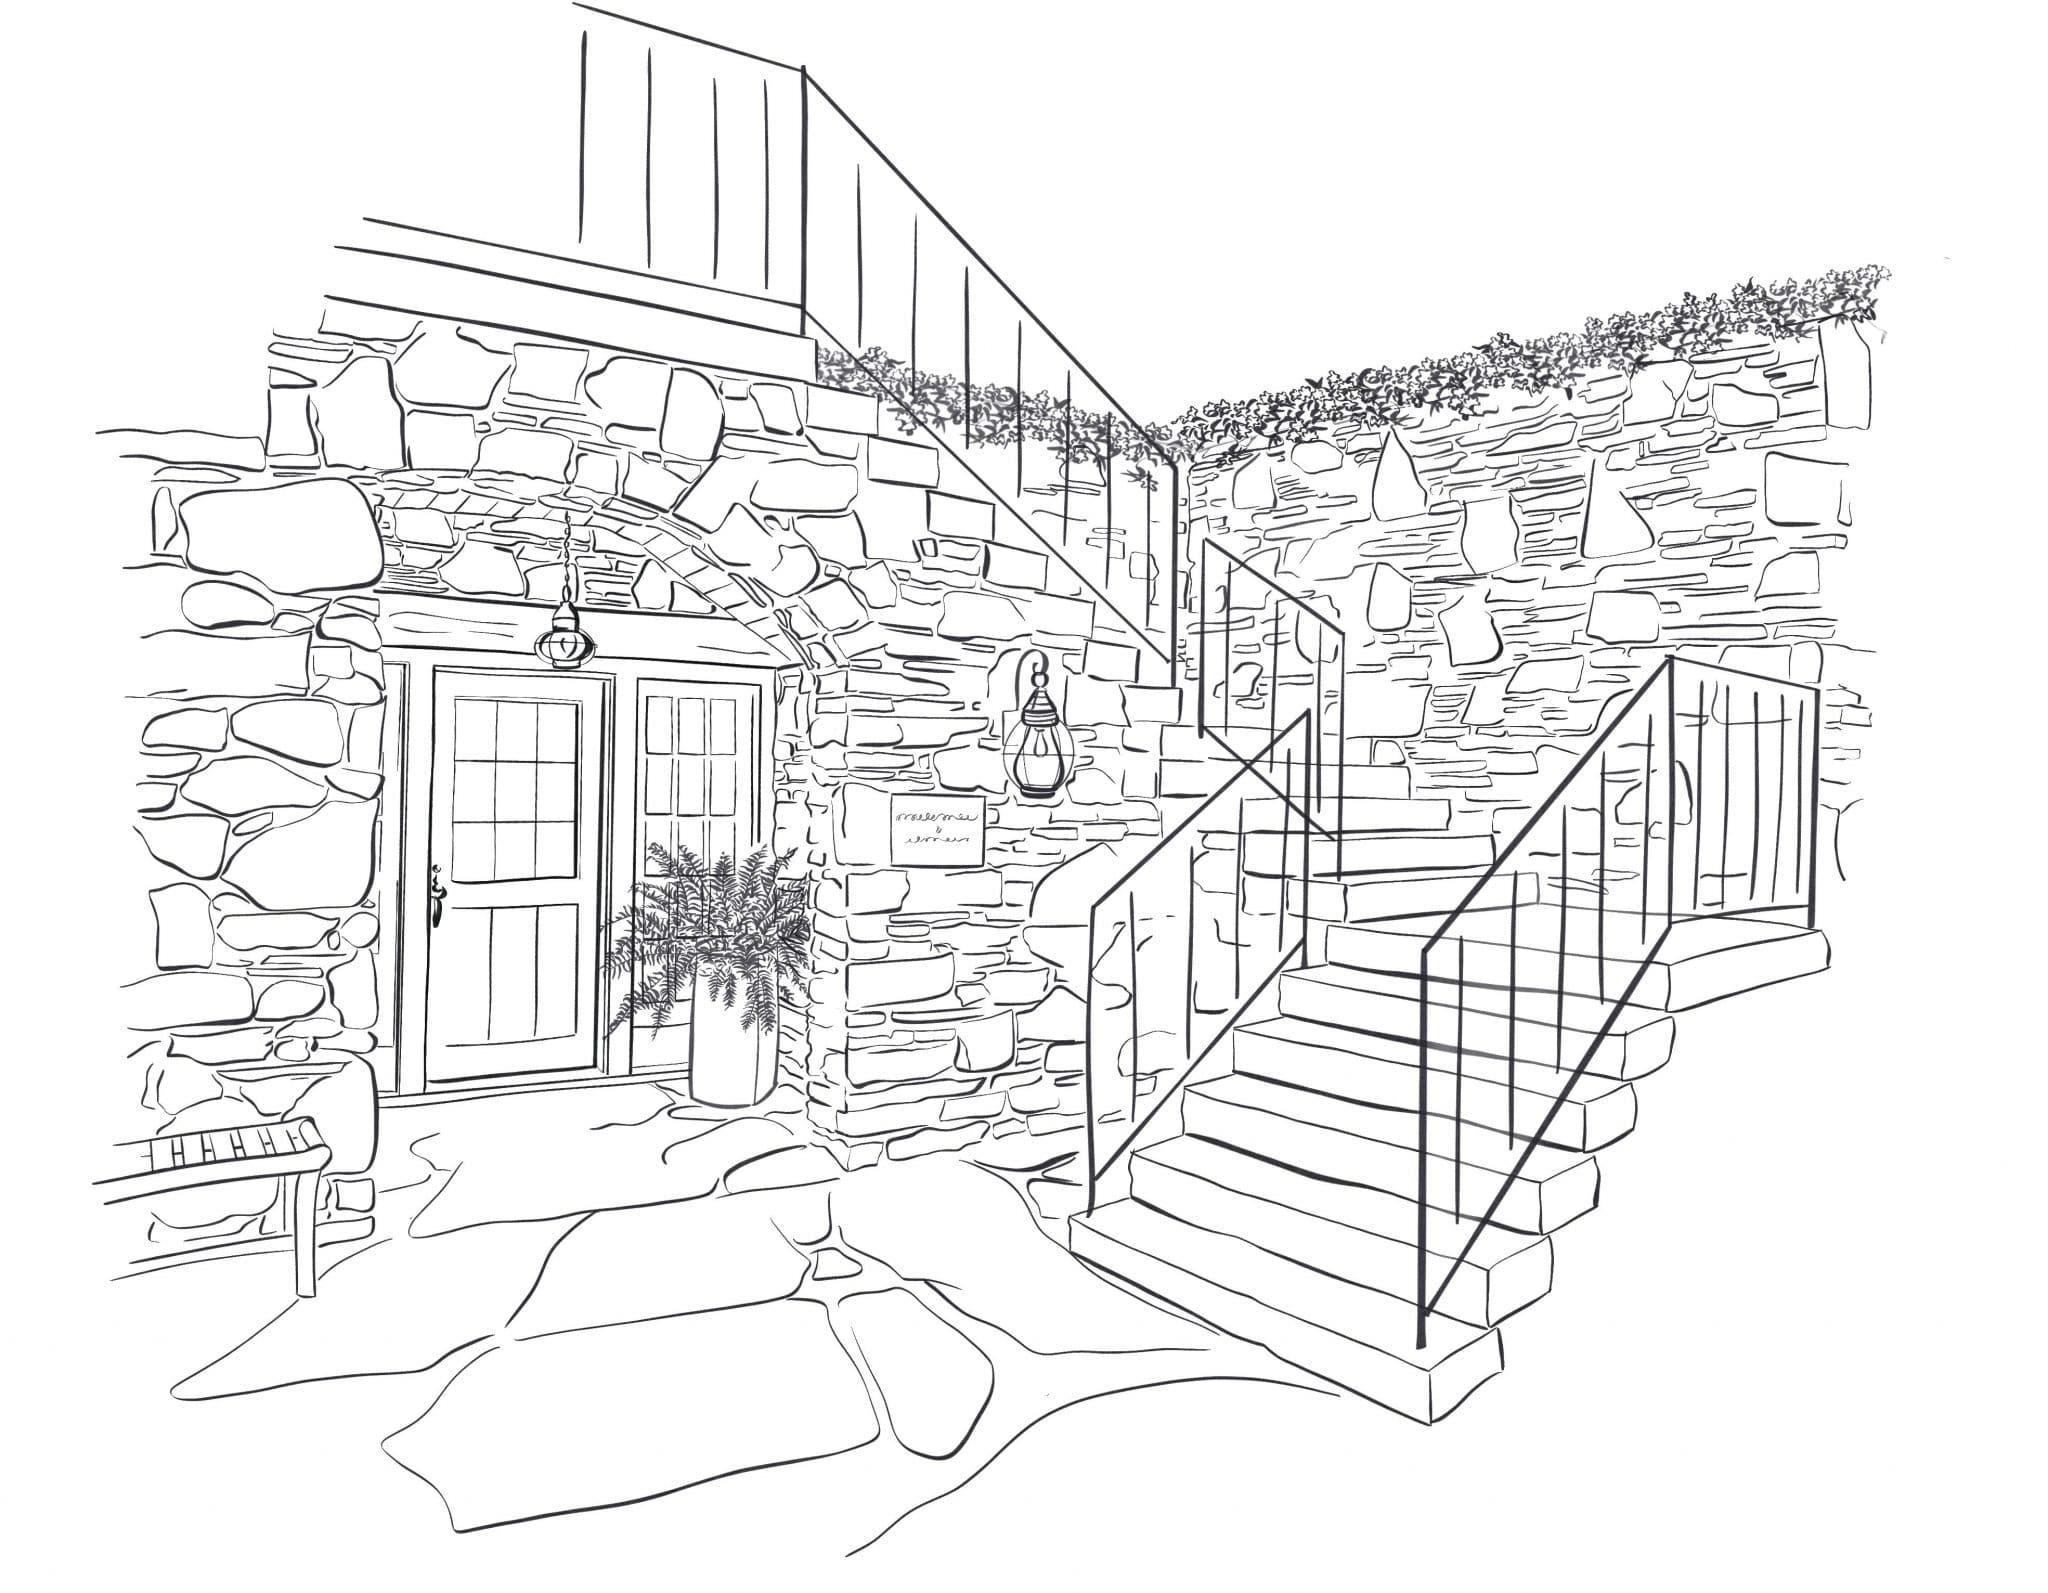 Sketch of stairs of a stone house